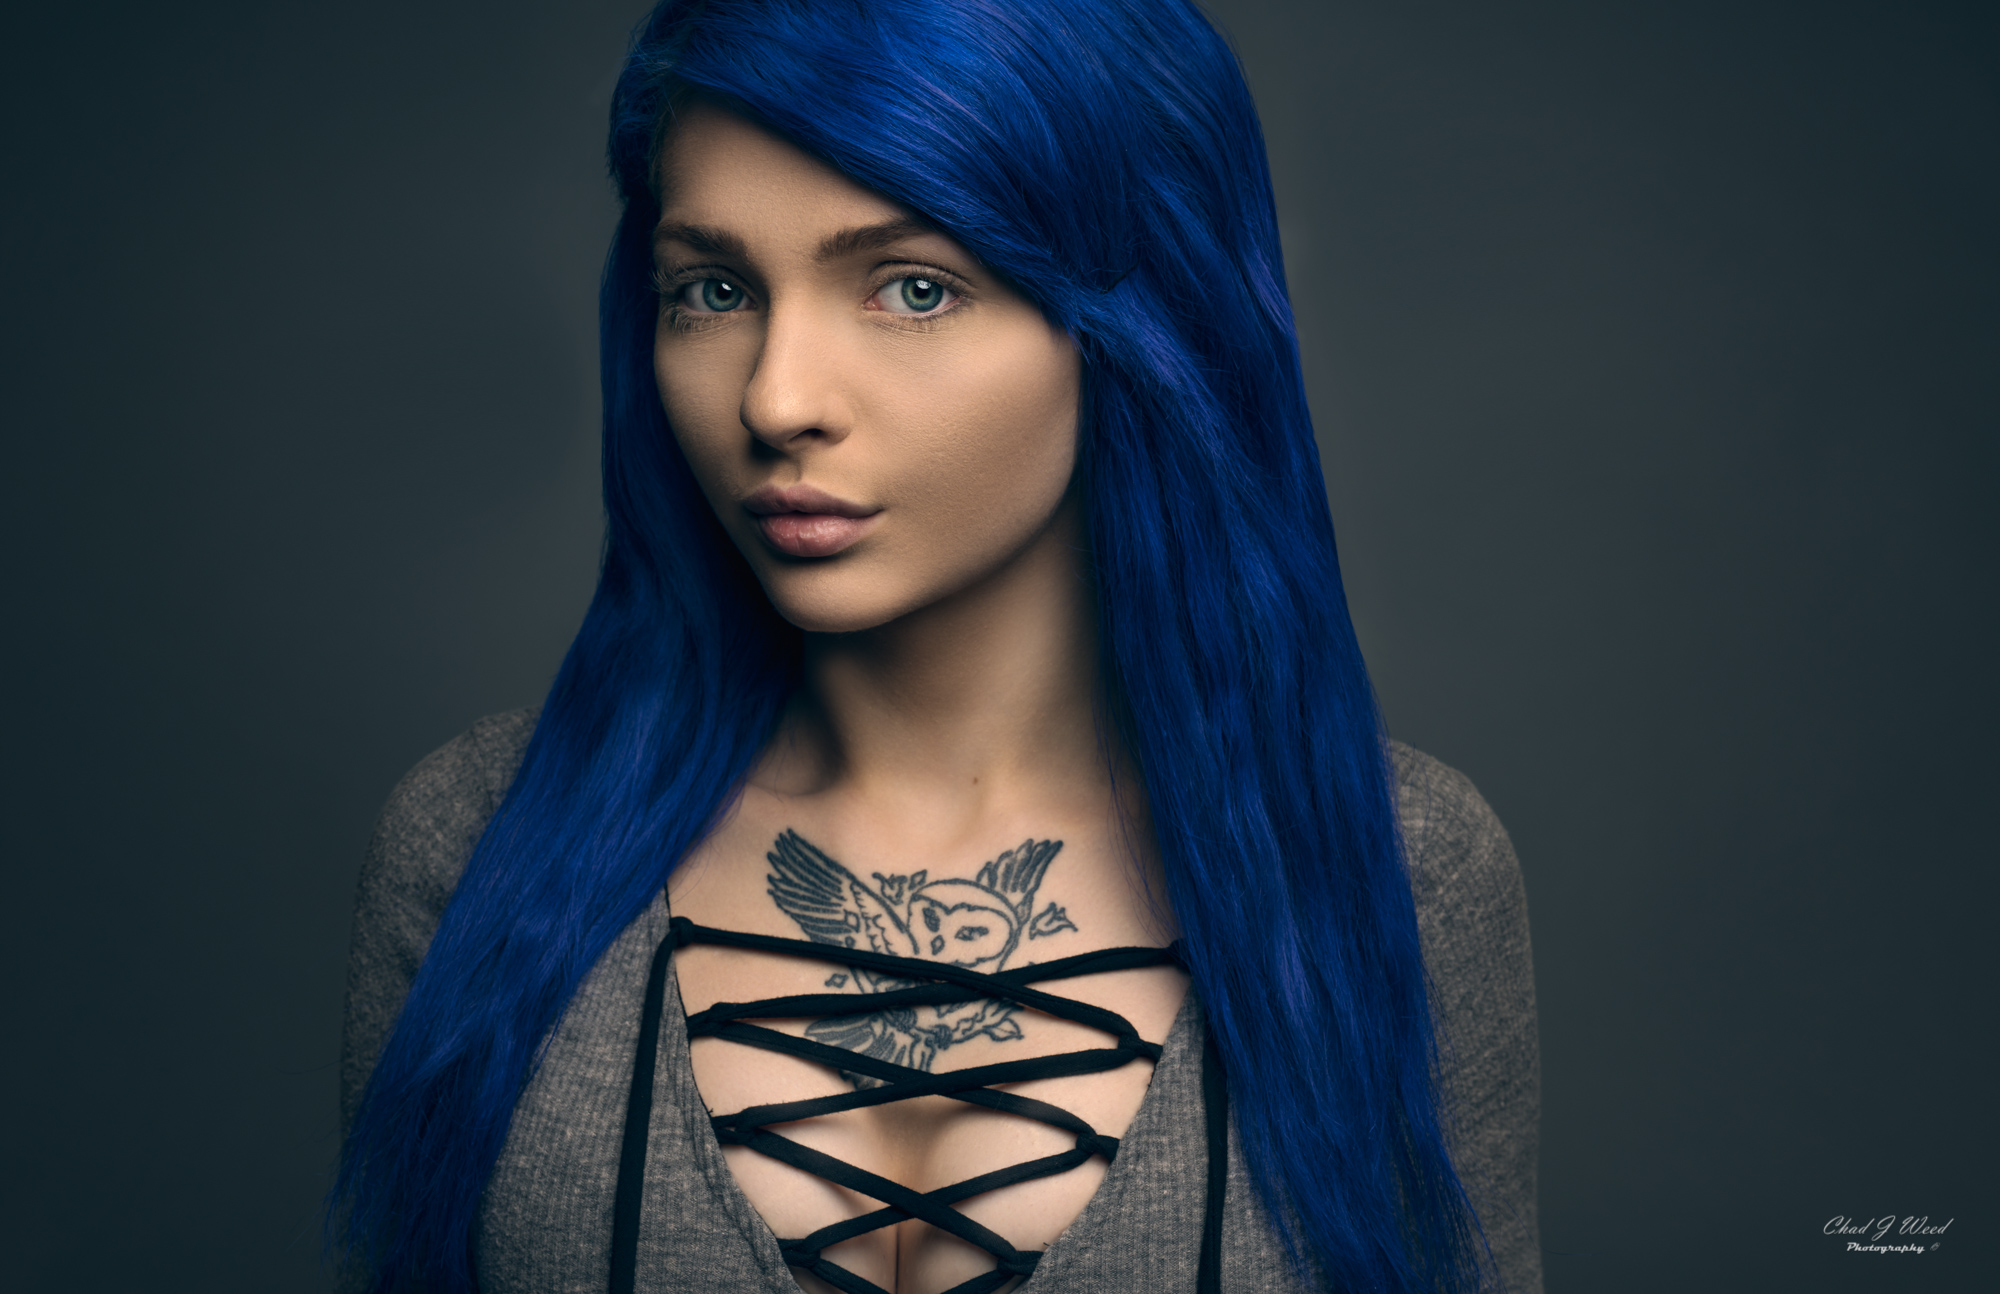 Indian Neon Blue Hair: 10 Stunning Looks to Inspire Your Next Dye Job - wide 6